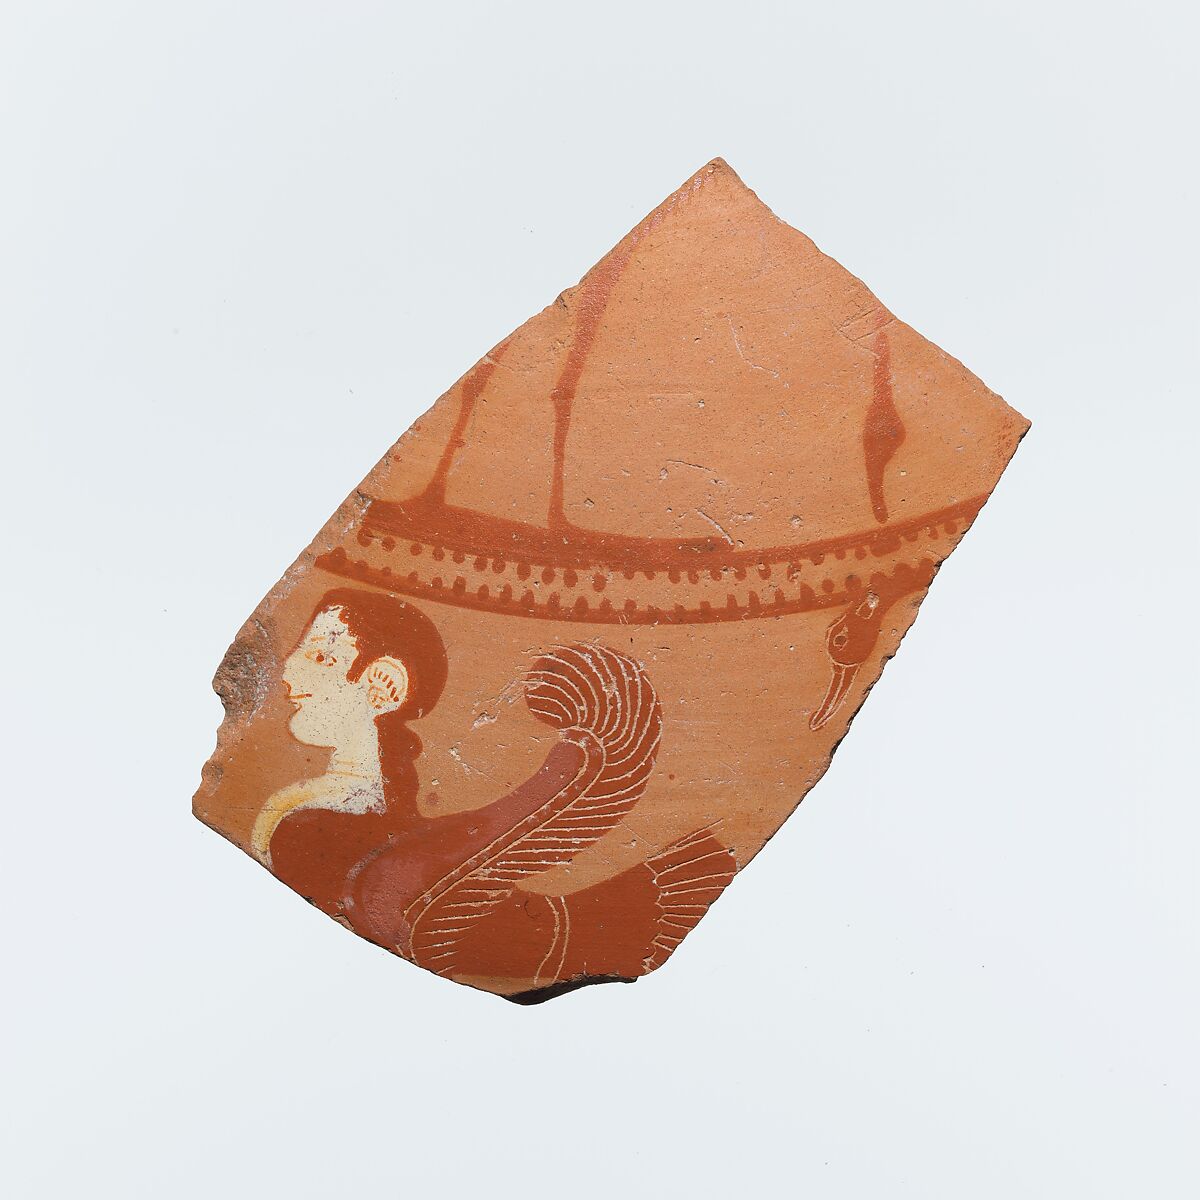 Fragment of a terracotta lid, Attributed to the Urla Group, Terracotta, East Greek, Clazomenian 